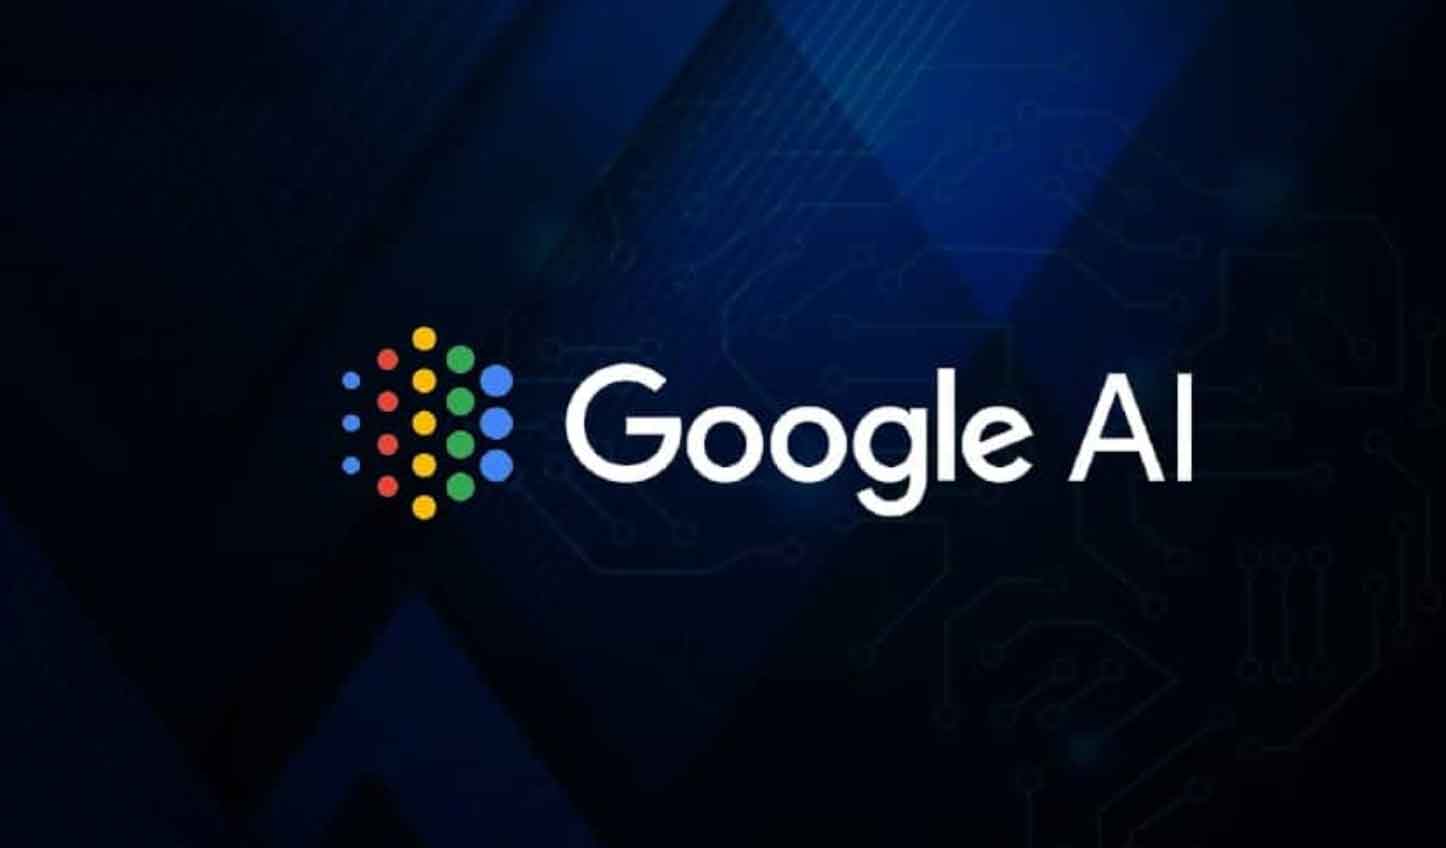 Google Aims To Make AI Easy As Using Google Search